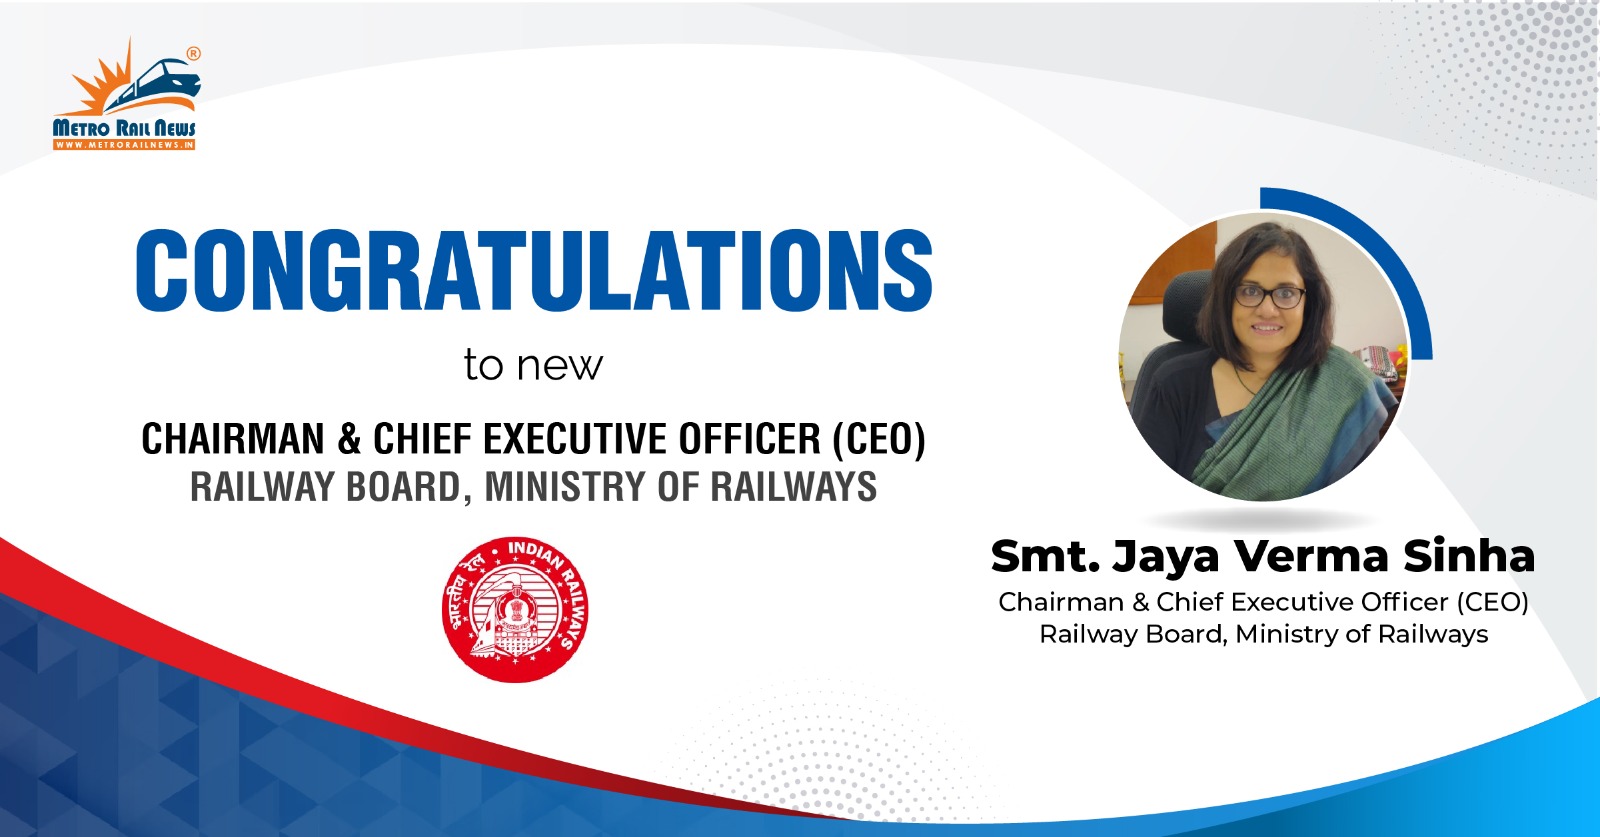 Smt. Jaya Verma Sinha Appointed as a new Chairperson and CEO of Railway Board.